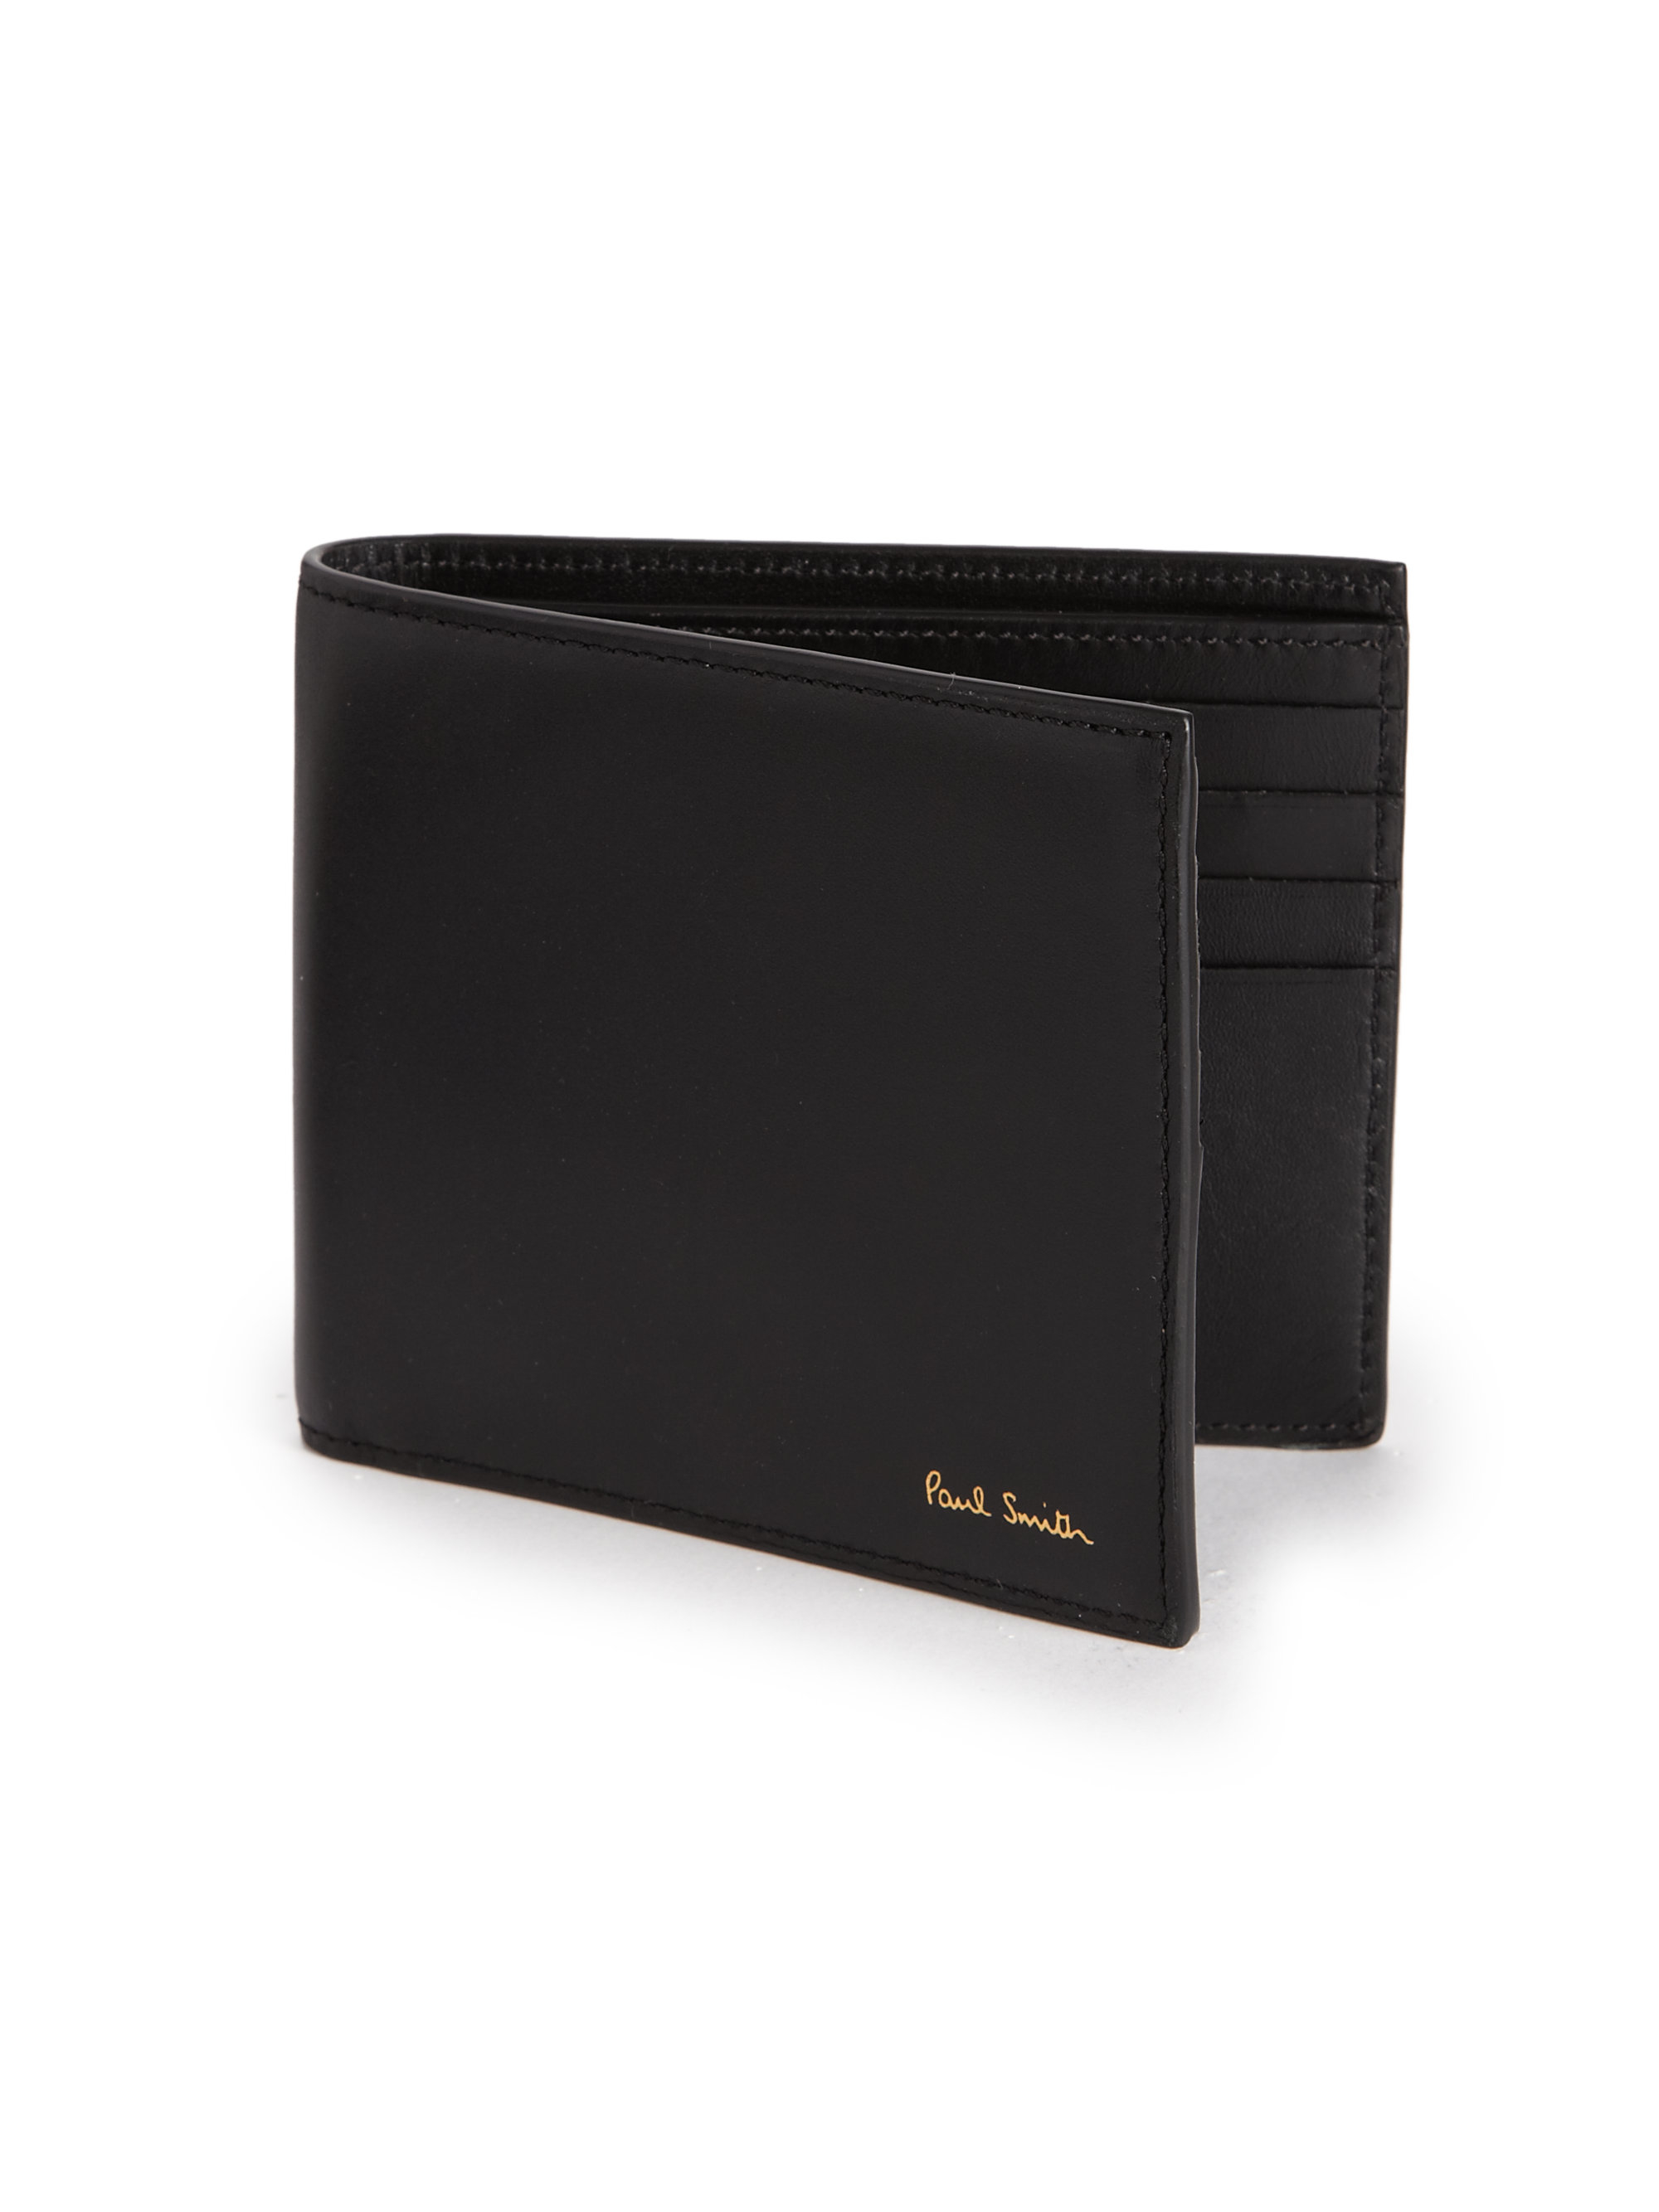 Lyst - Paul Smith Pin-up Girl Leather Bifold Wallet in Black for Men